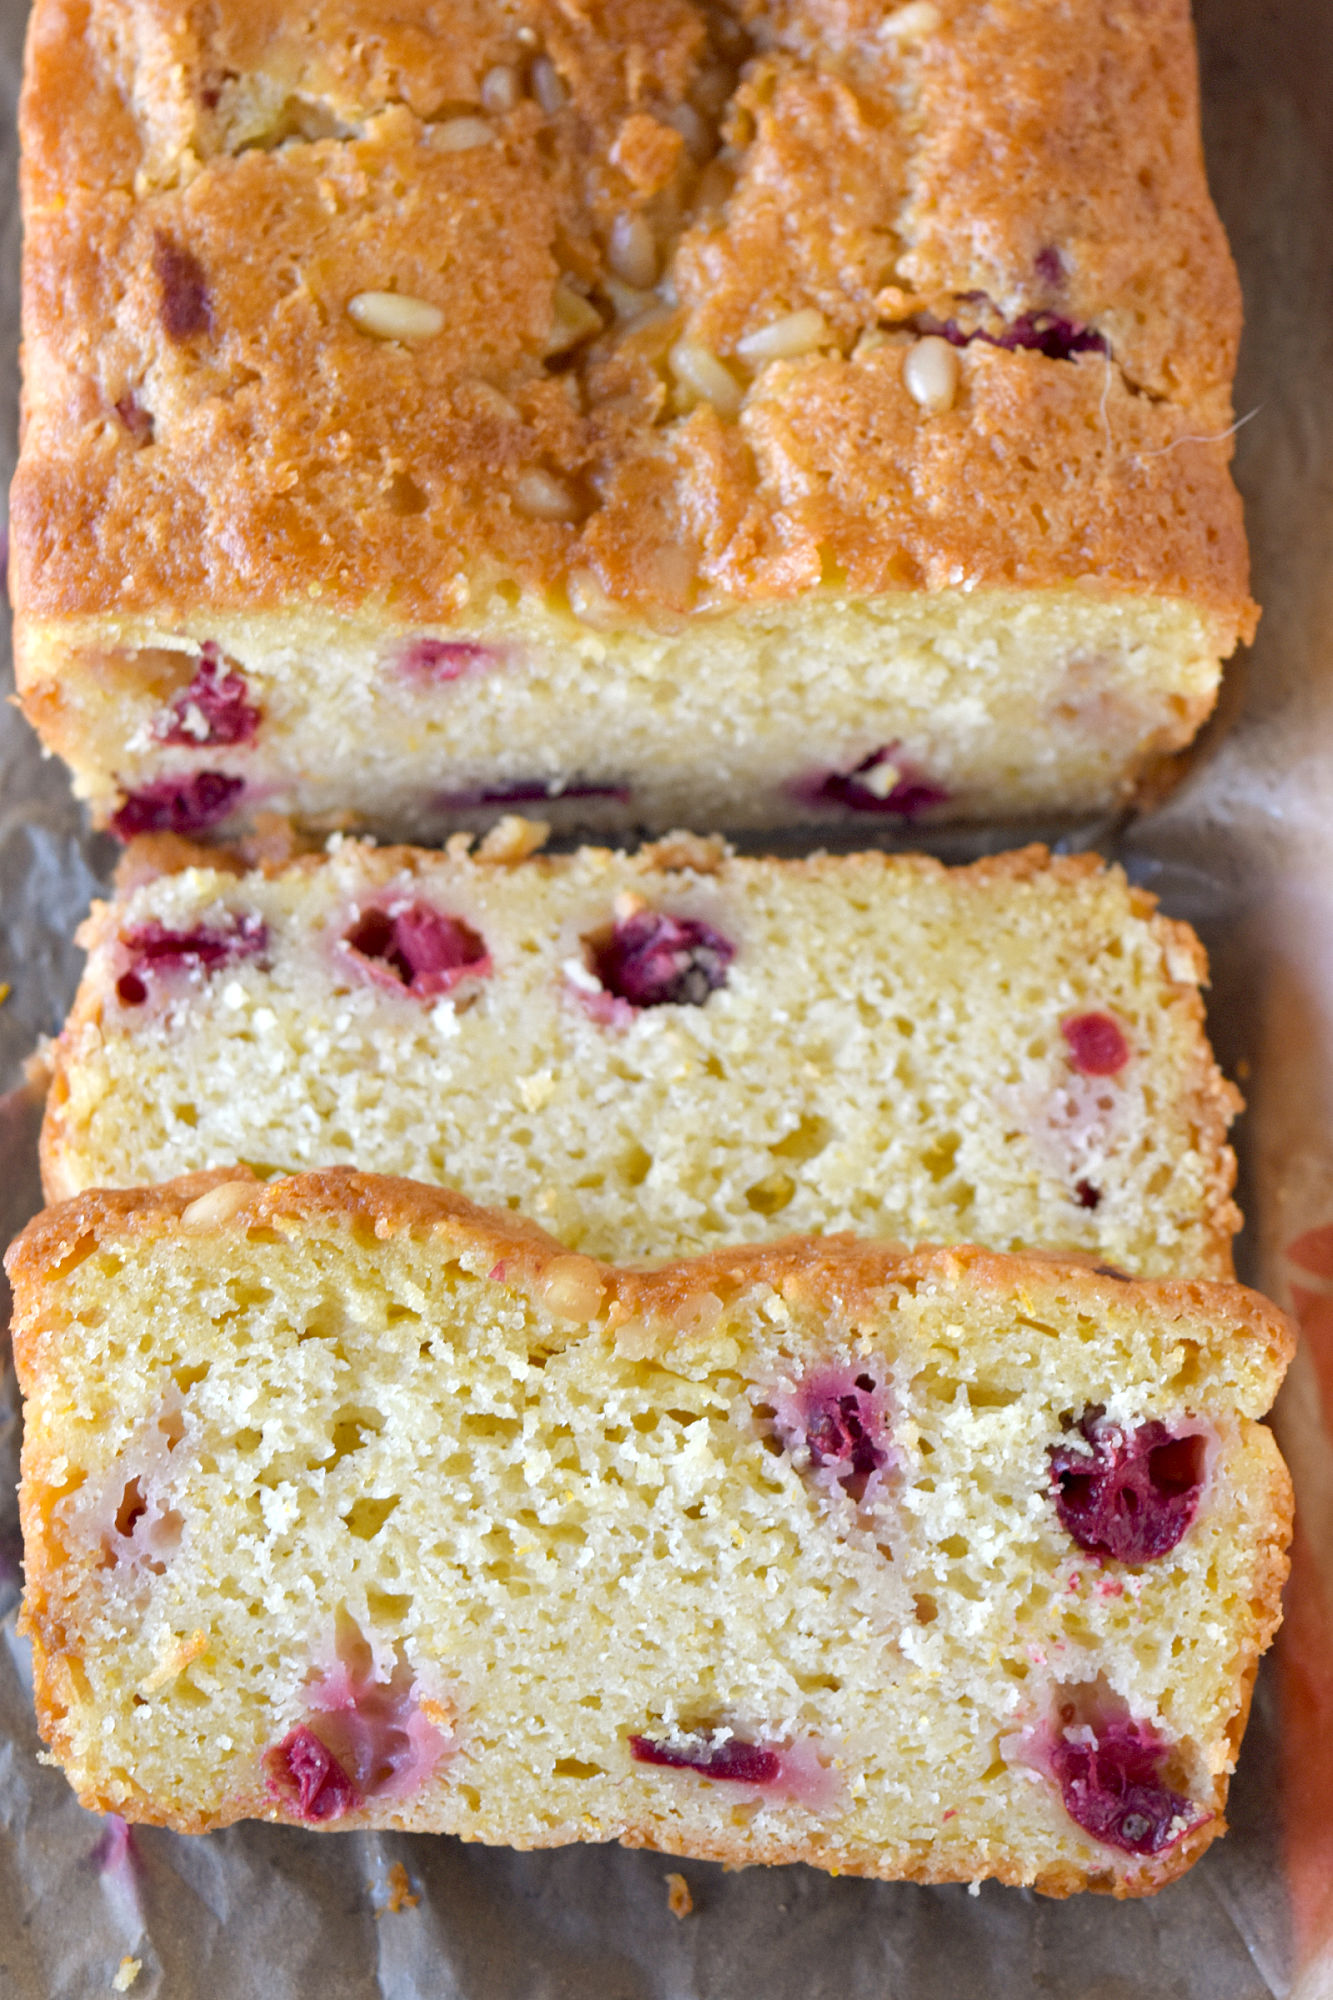 Satisfy your cravings with a delectable slice of my easy Moist Cranberry Orange Quick Bread. It is guaranteed to bring joy to your taste buds. #CranberryWeek #QuickBreadLife #CranberryOrangeGoodness #Homesweethomebaking #FreshFromtheOven
